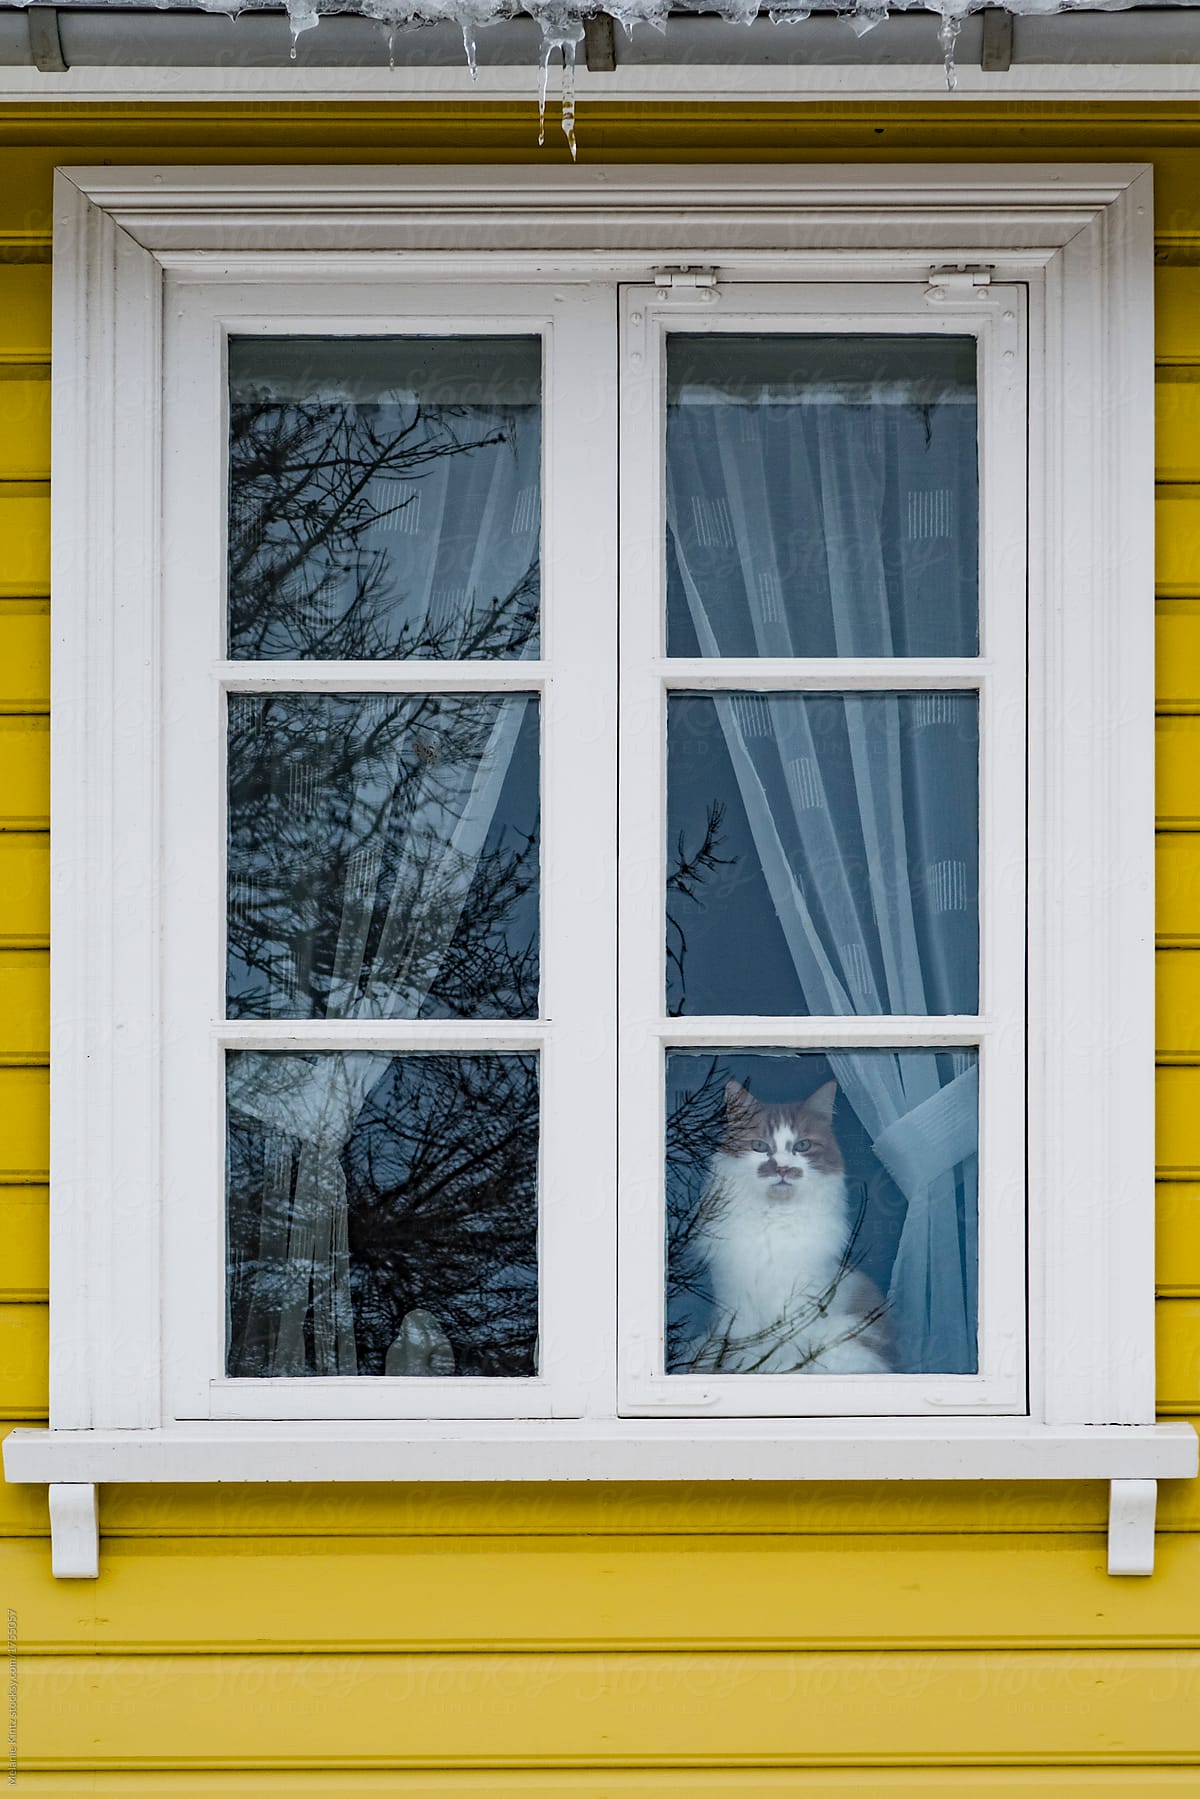 Cat sits in a window in Iceland